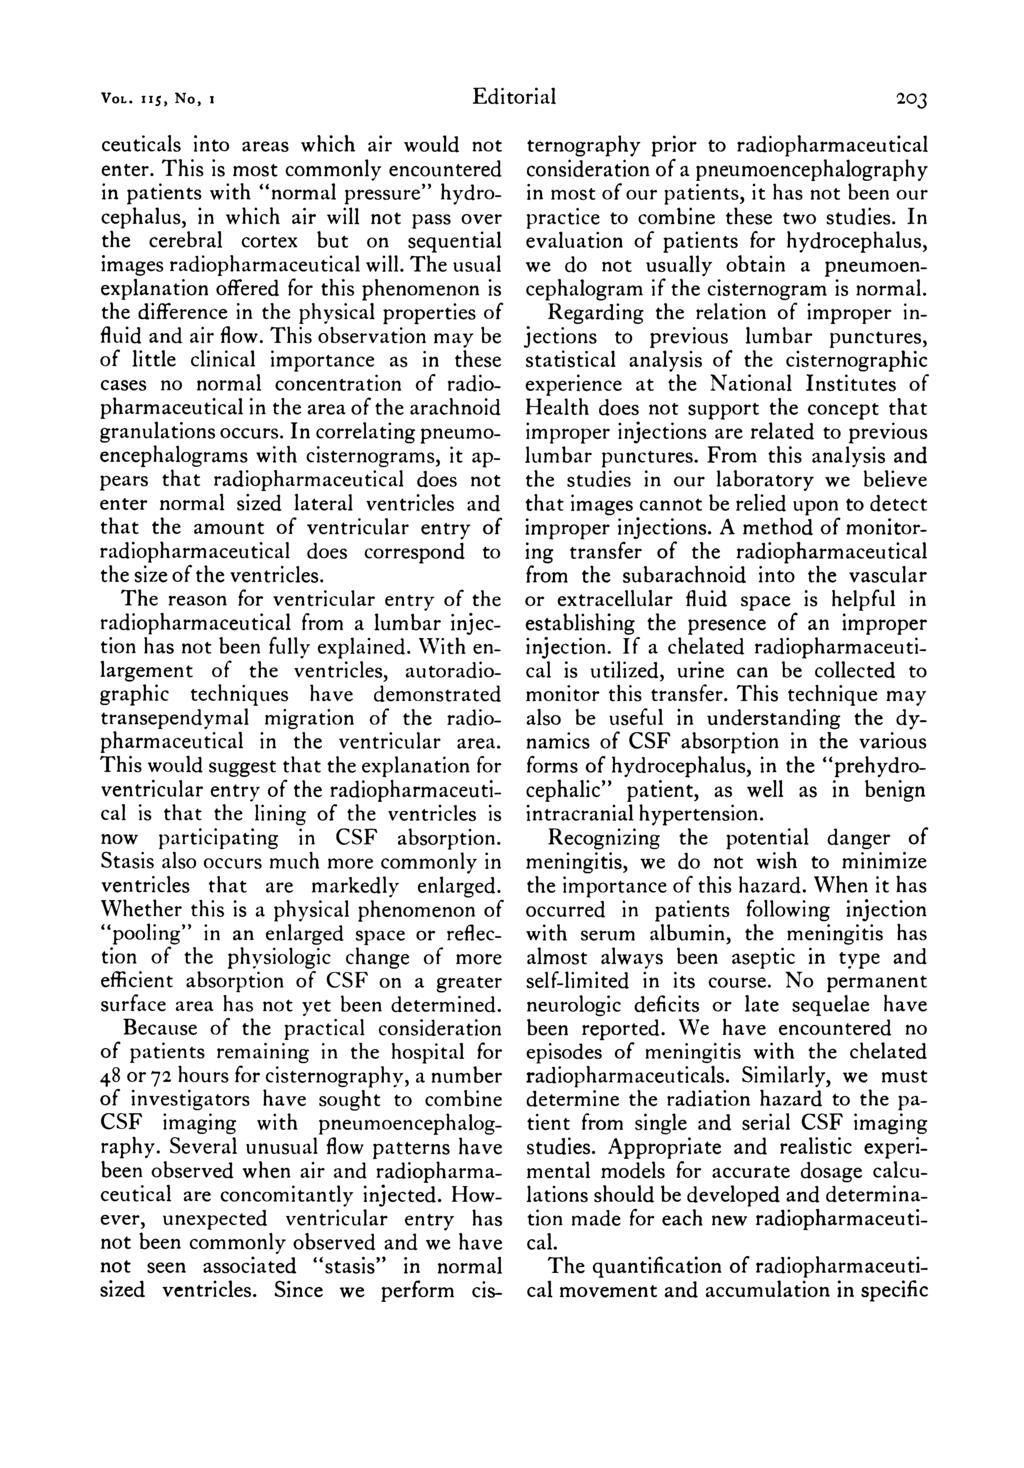 VOL. 115, No, Editorial 203 ceuticals into areas which air would not enter.